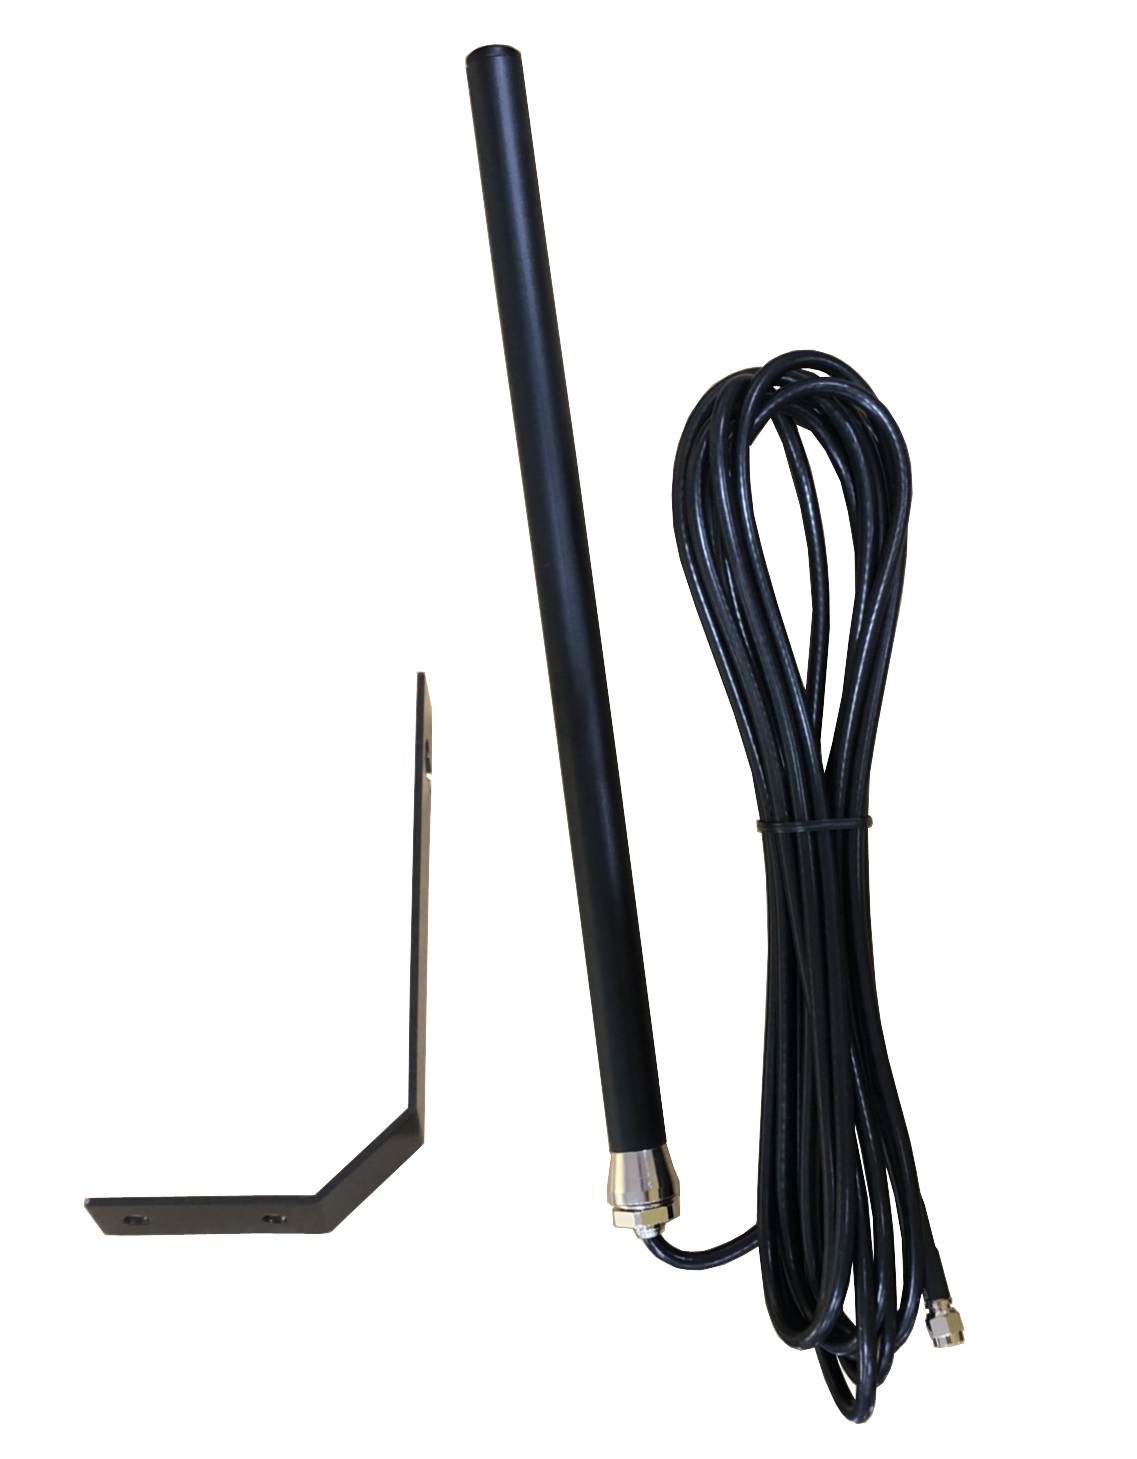 Agricultural / Tractor OMNI Antenna for Body Parts System made by Chinmore Industry Co., LTD.　竣茂工業有限公司 - MatchSupplier.com